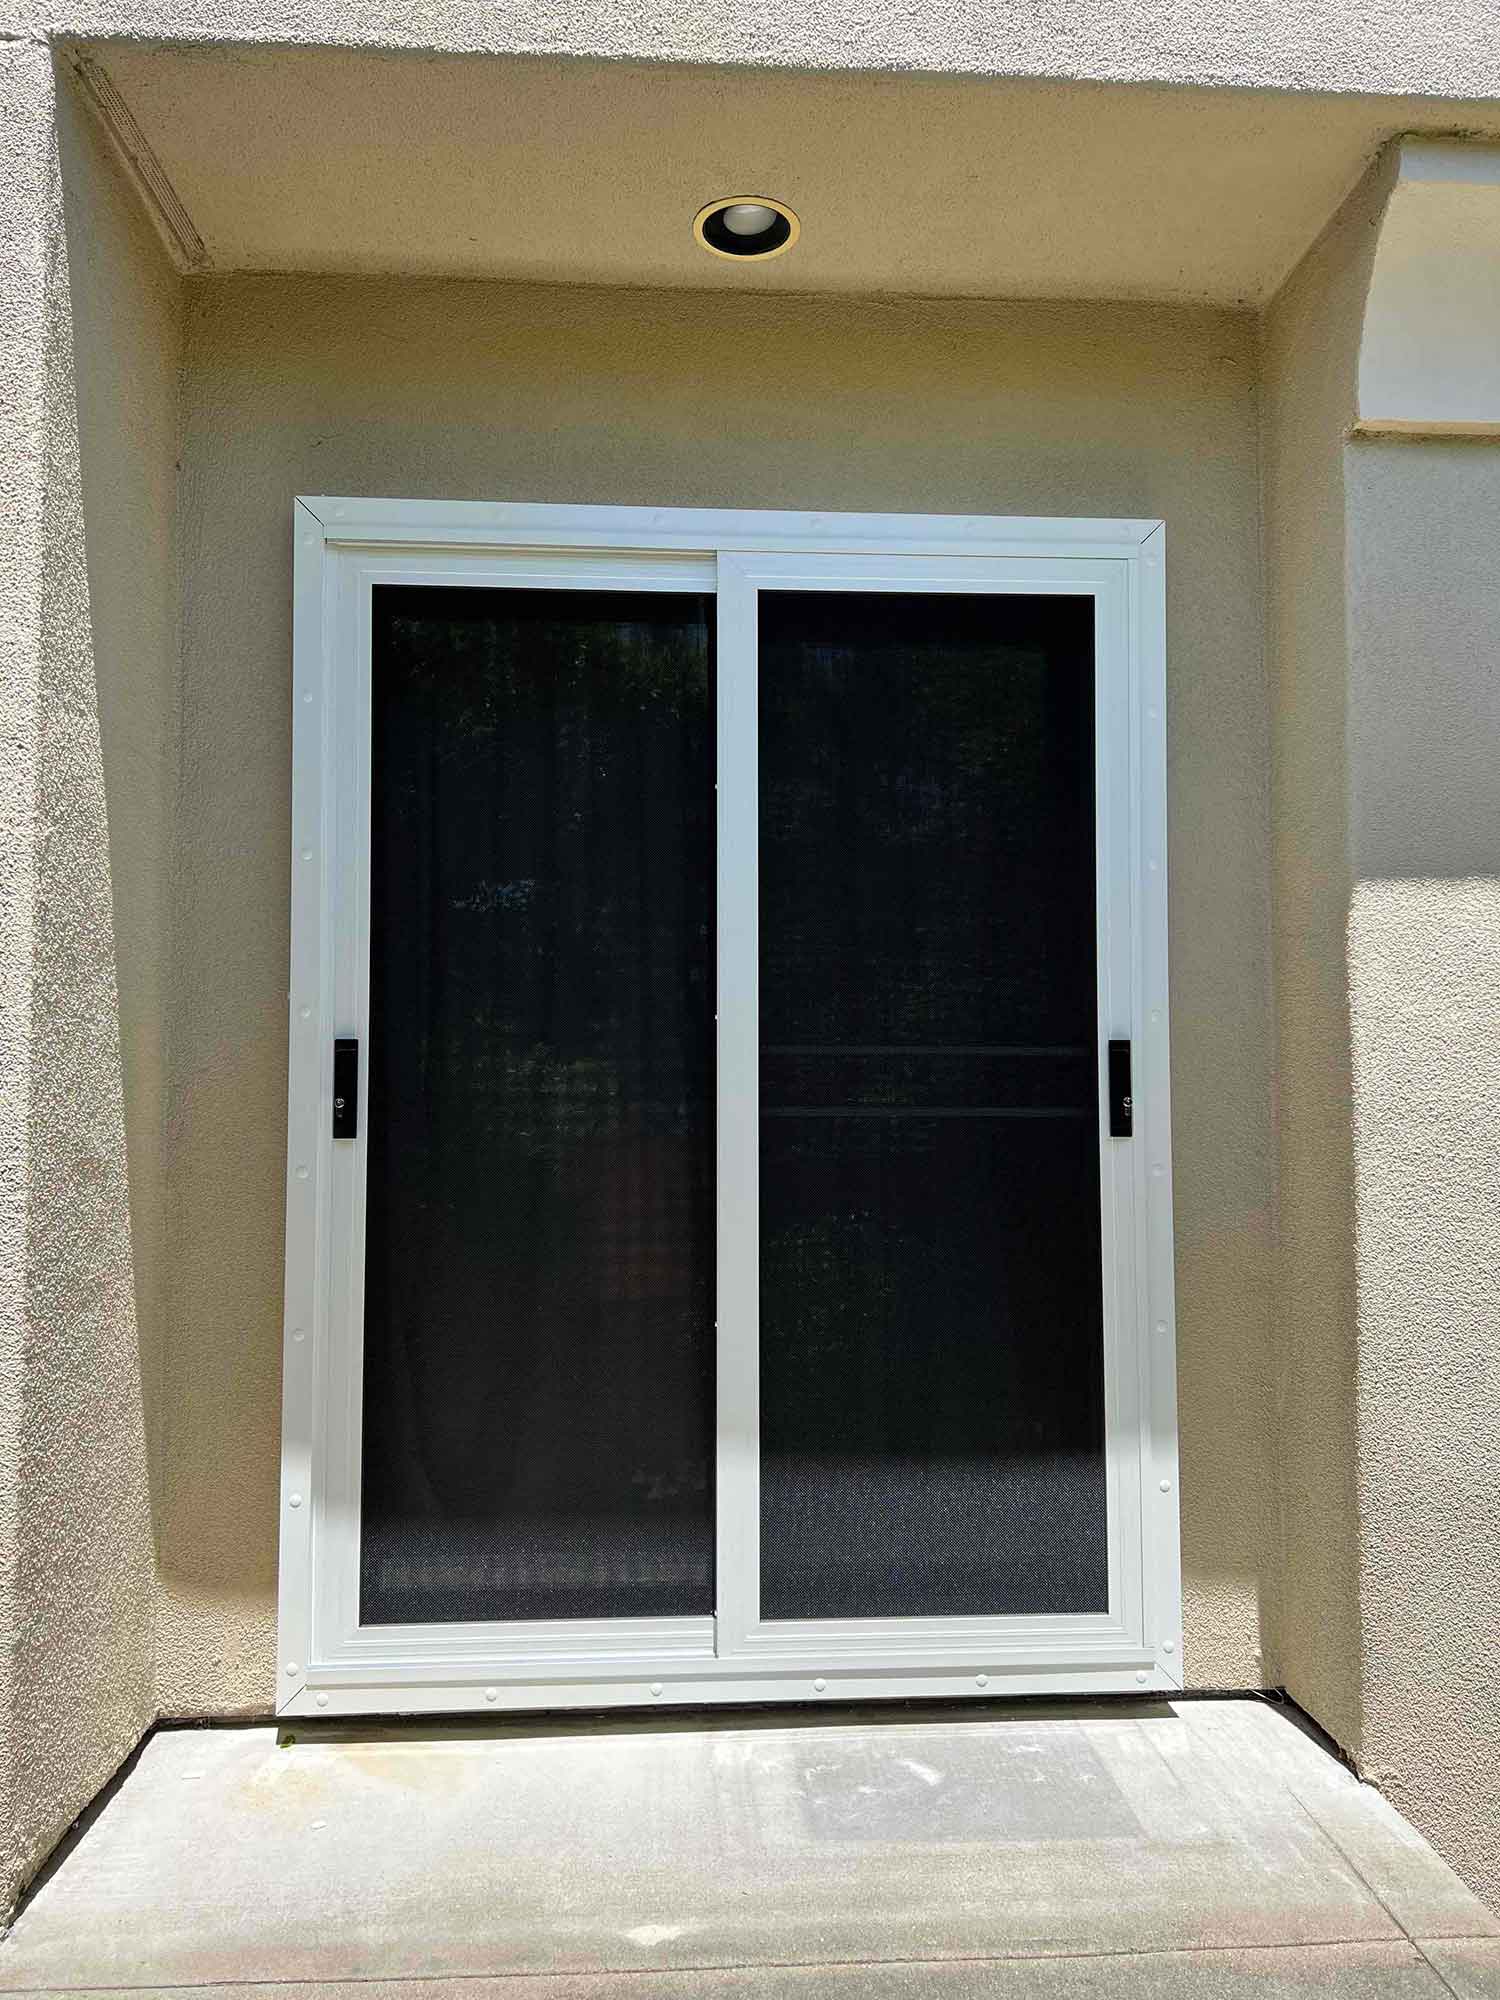 Get custom Crimsafe security screens for your doors and windows from ClimatePro.